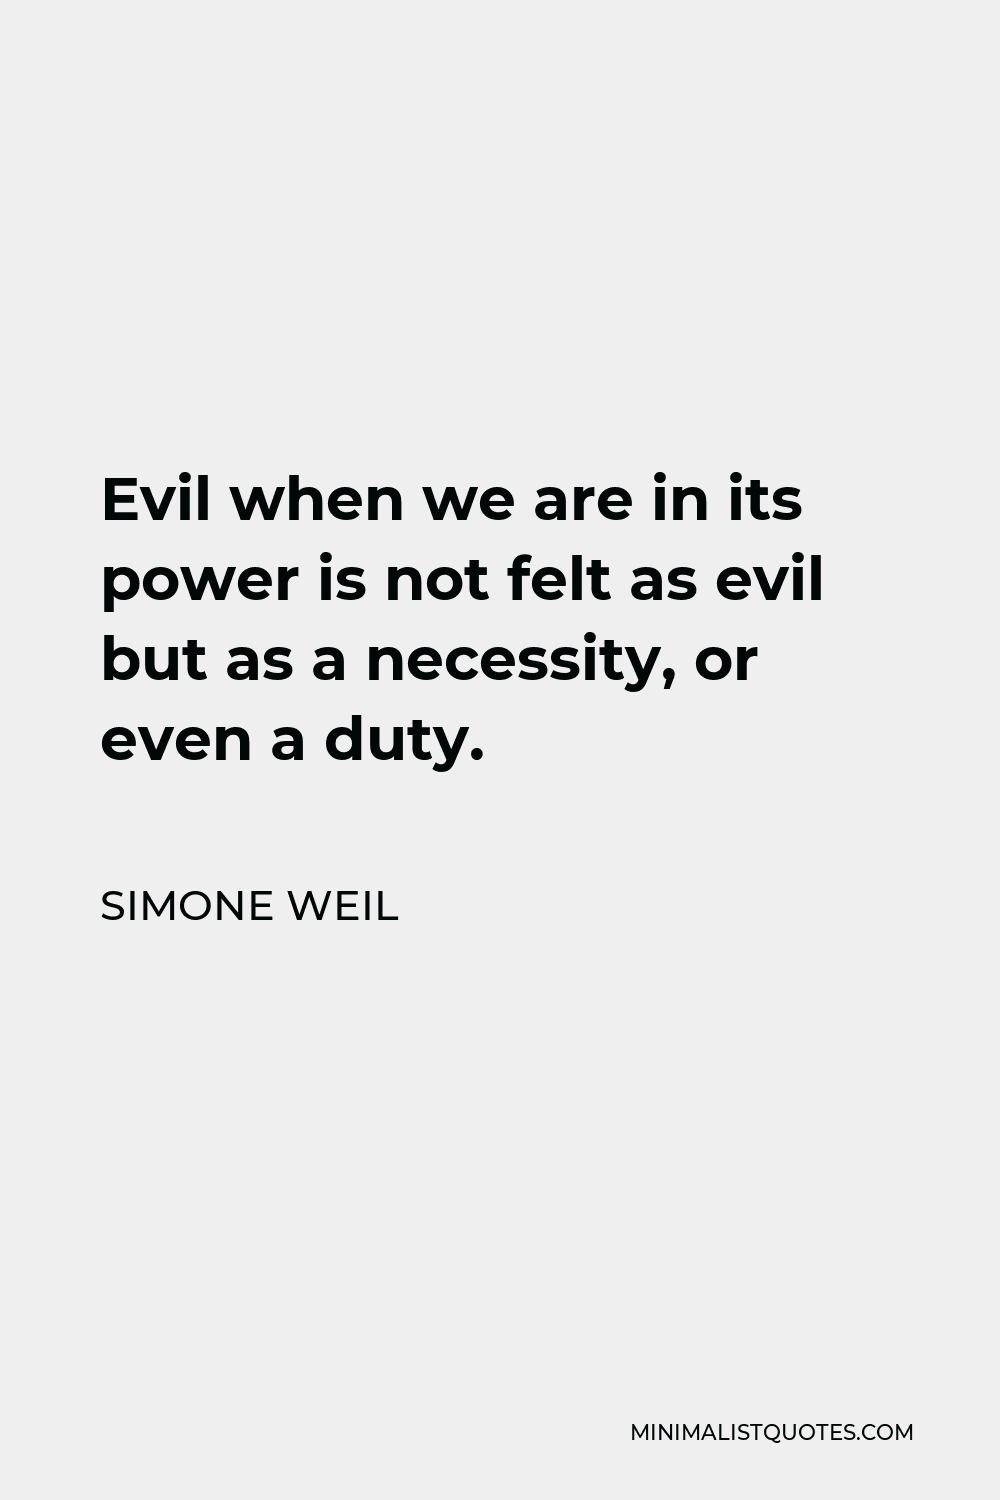 Simone Weil Quote - Evil when we are in its power is not felt as evil but as a necessity, or even a duty.